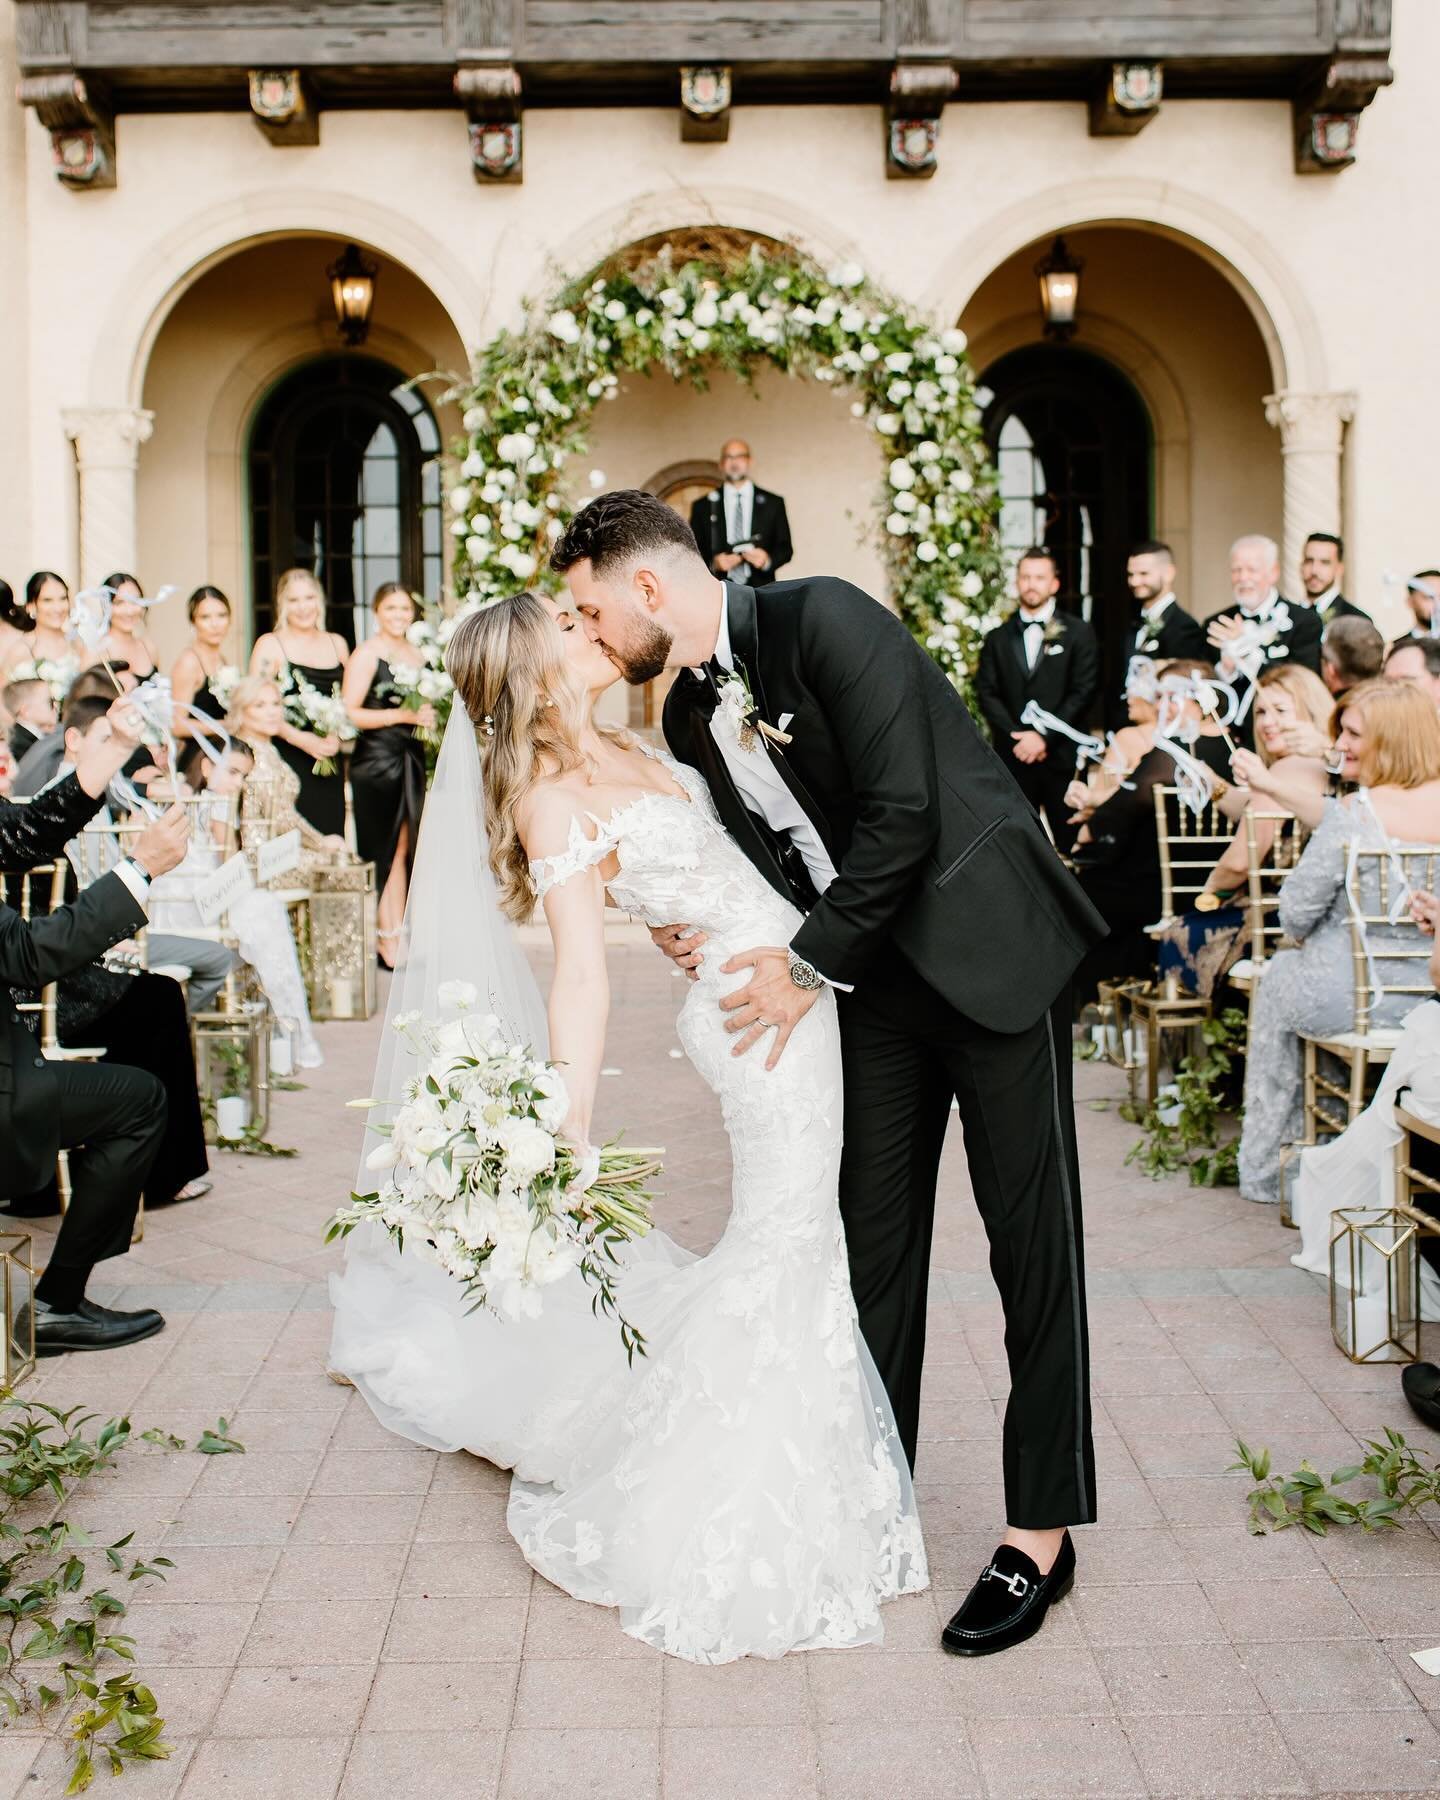 Those down the aisle moments at the end of a ceremony are always so special!! Want to know some tips on how your photos can look amazing during these moments? 

Here&rsquo;s what I recommend:

Light. Beautiful photos usually require some light. My pr